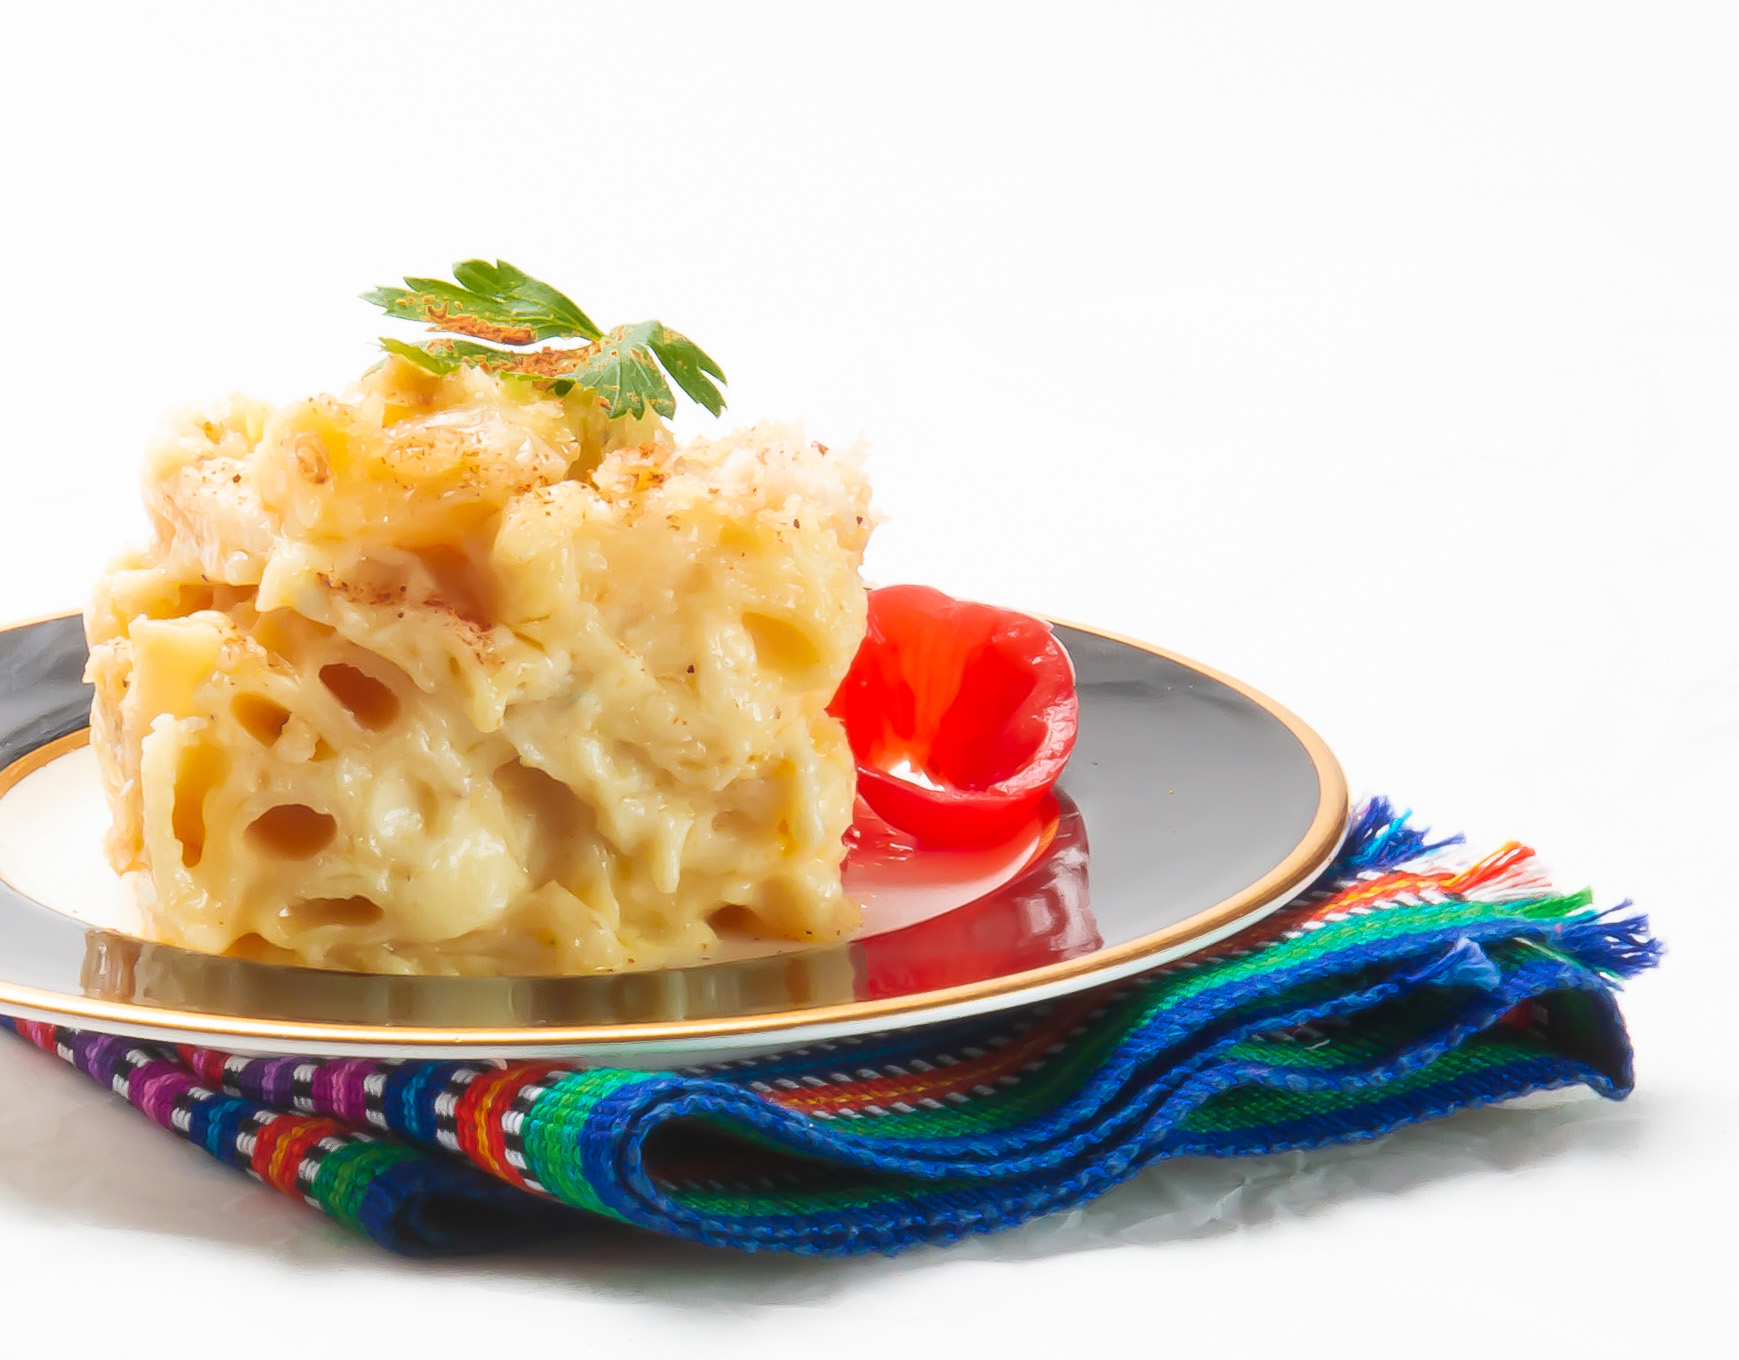 The Best Things In Life Are…Well …Simple: James Beard’s Macaroni and Cheese